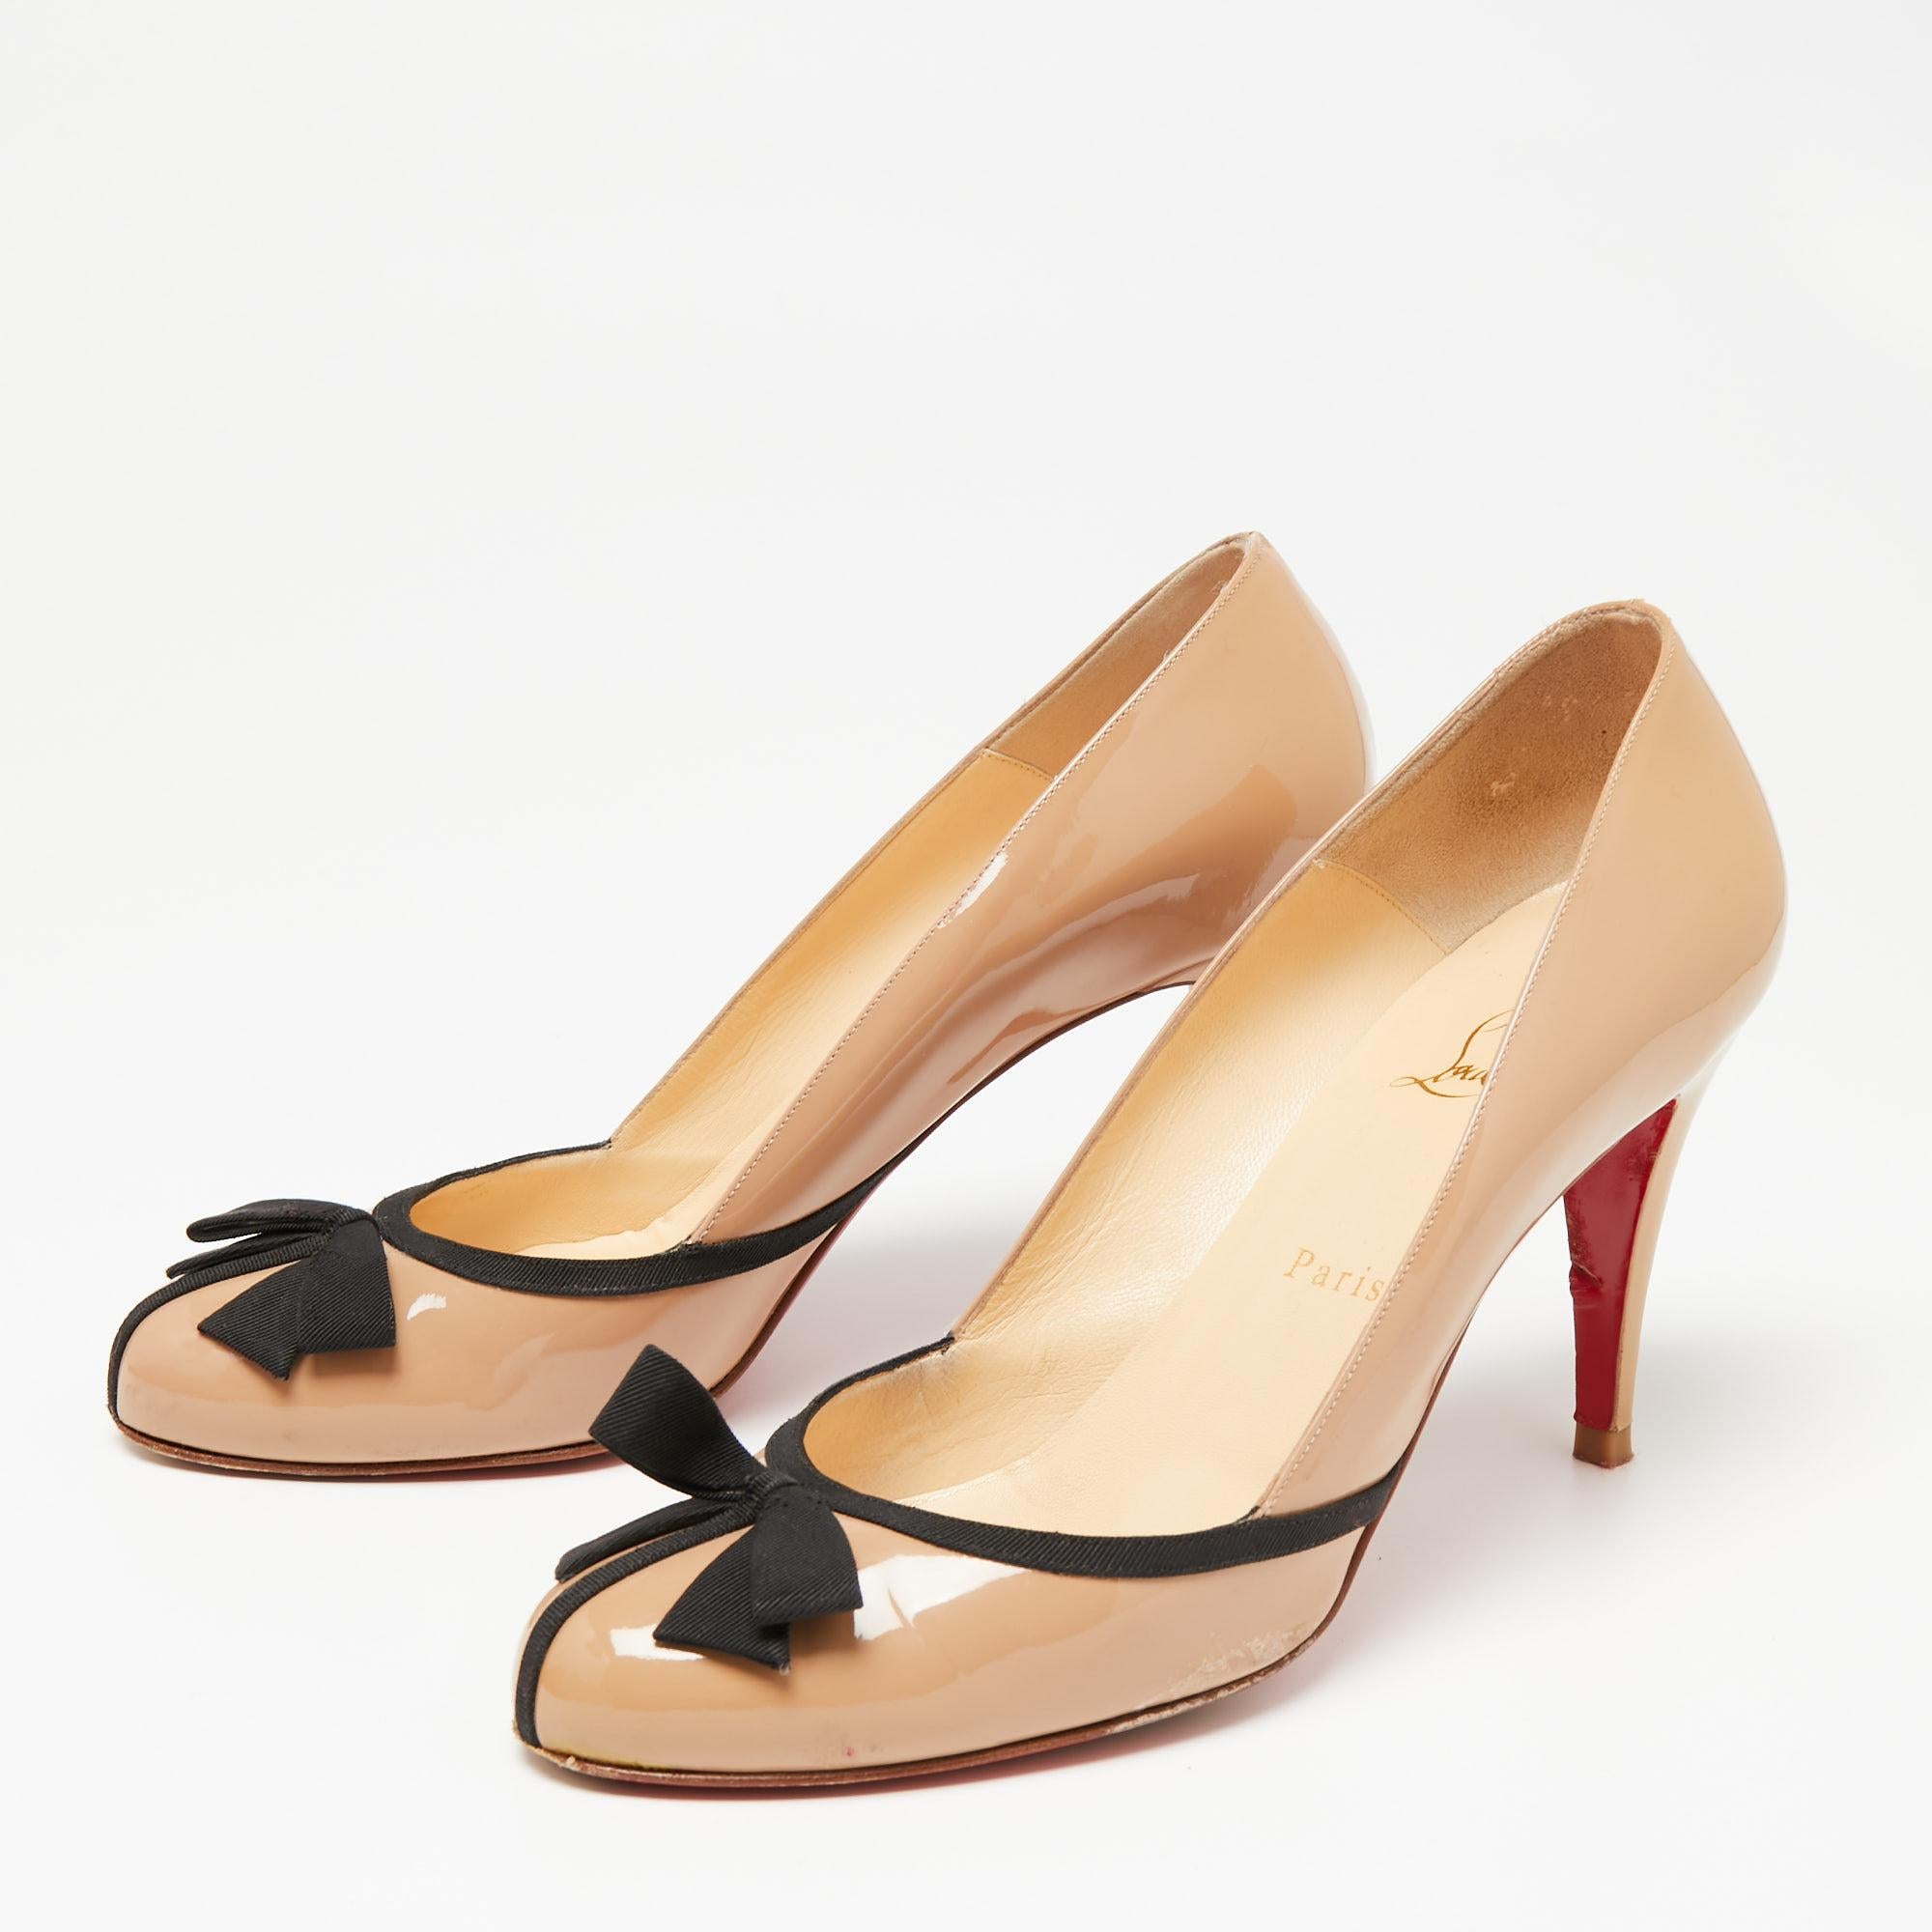 Women's Christian Louboutin Beige Patent Leather Lavalliere Pumps Size 39.5 For Sale